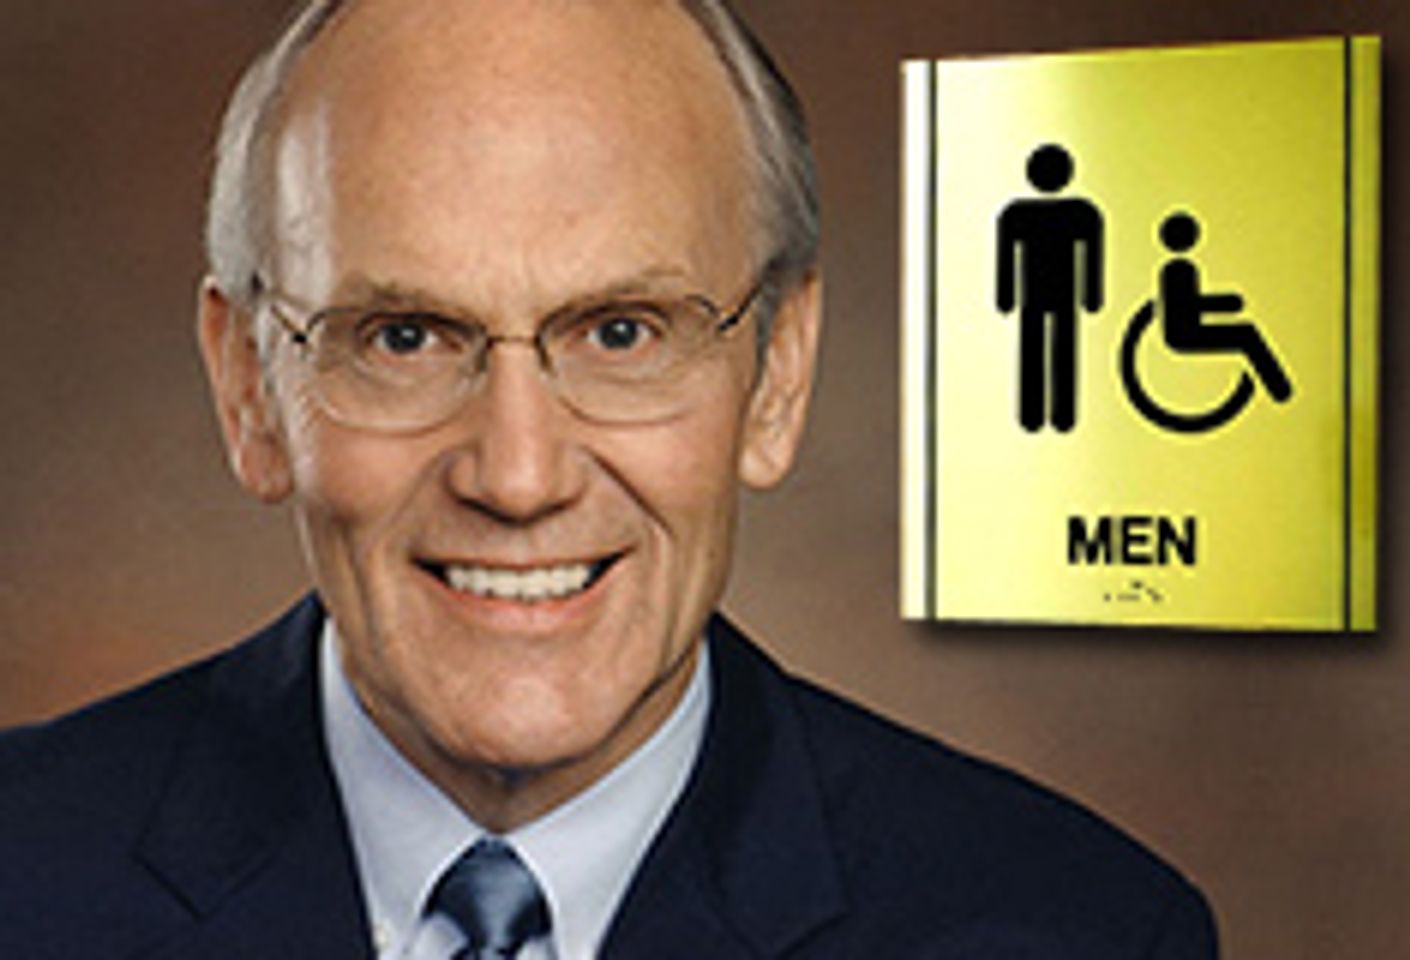 More Larry Craig Gay Sex Allegations Emerge